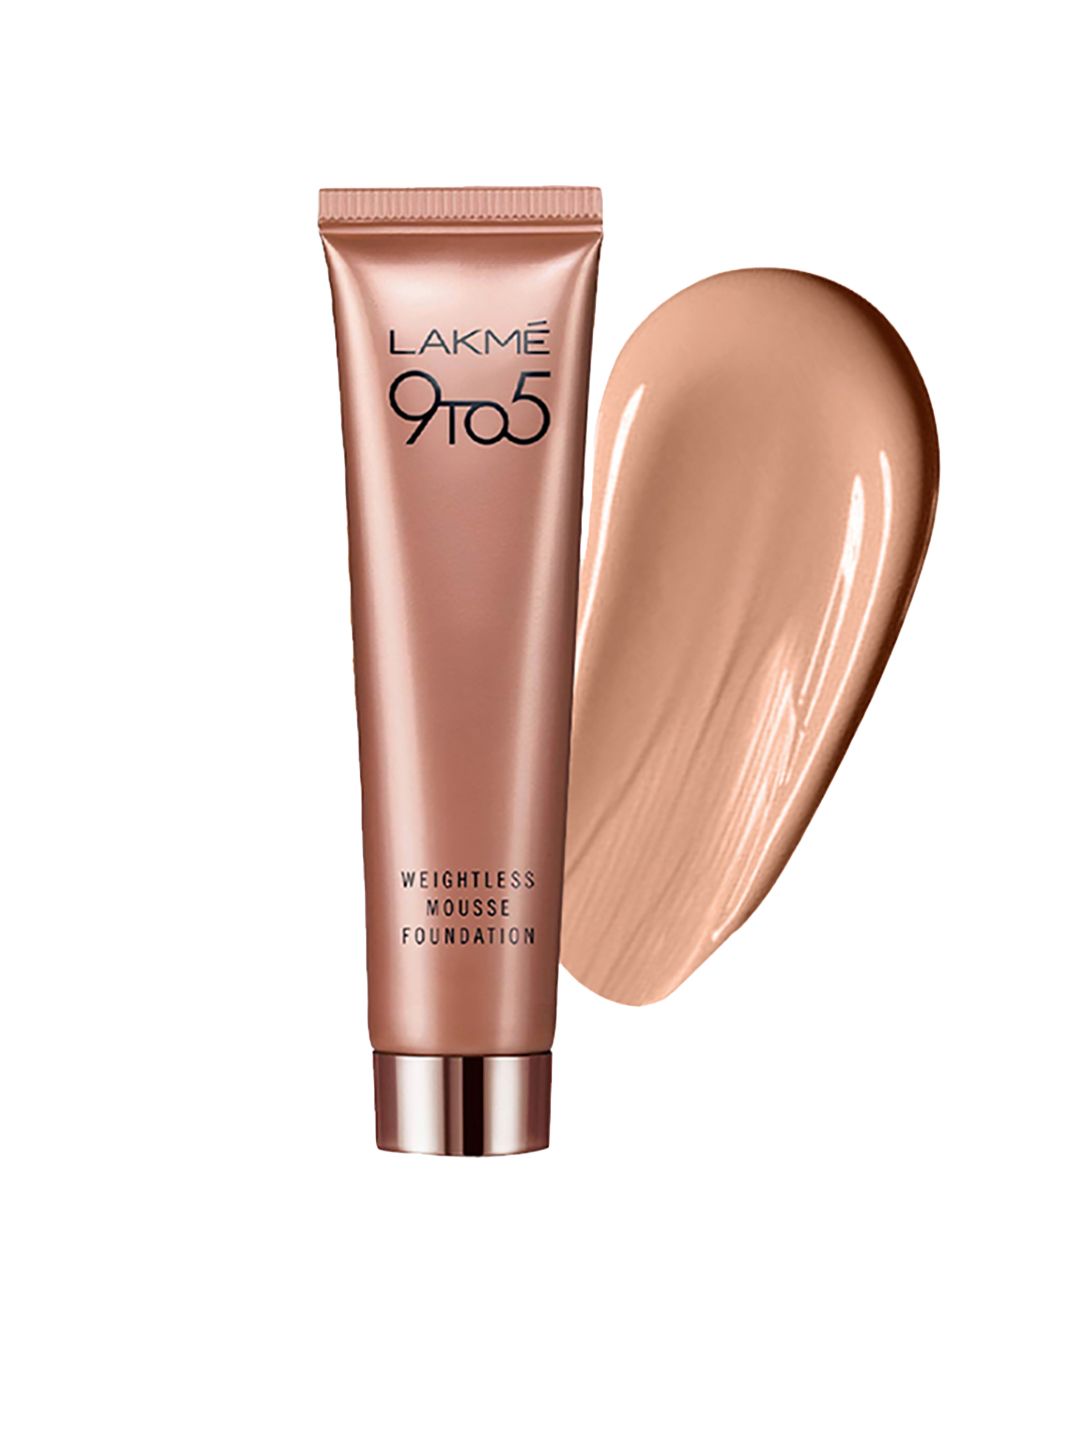 Lakme 9 to 5 Weightless Mousse Foundation - Bronzed Glow 07 25g Price in India